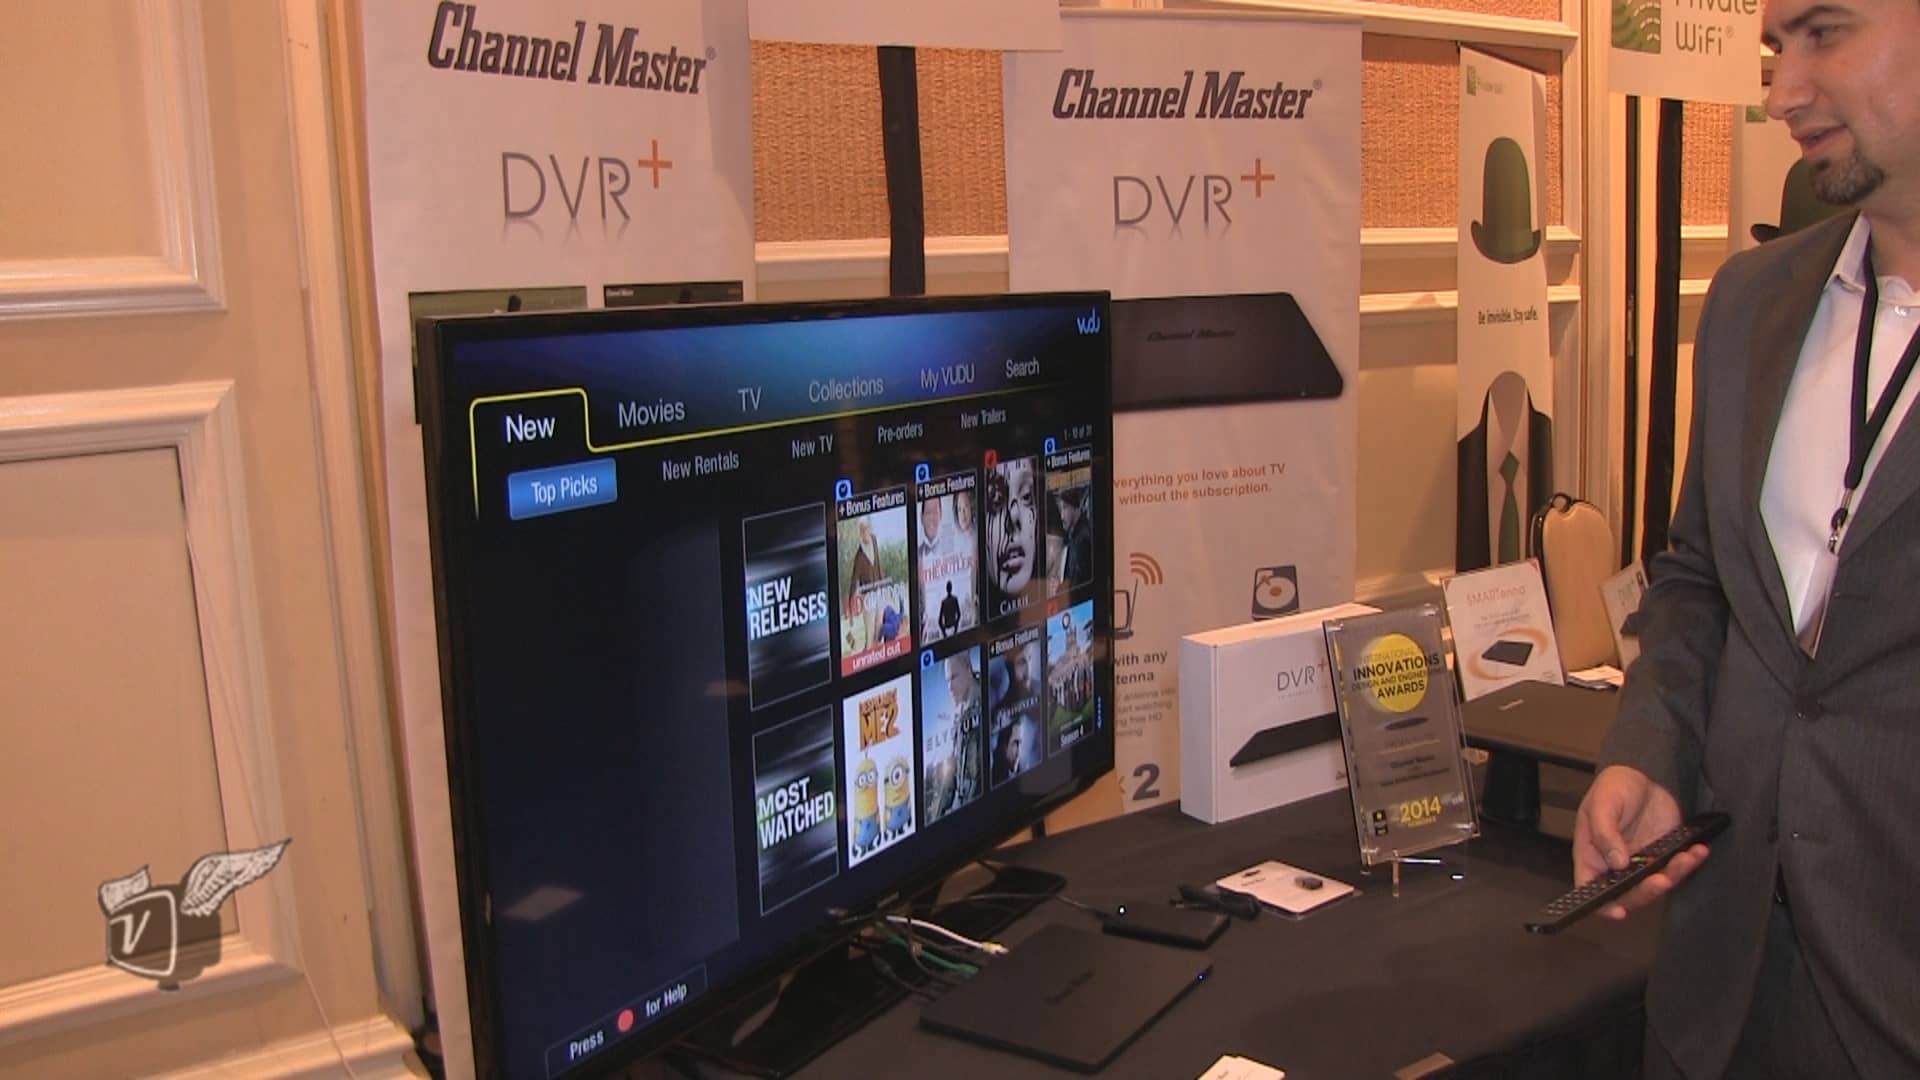 An image of the Channel Master DVR user guide.